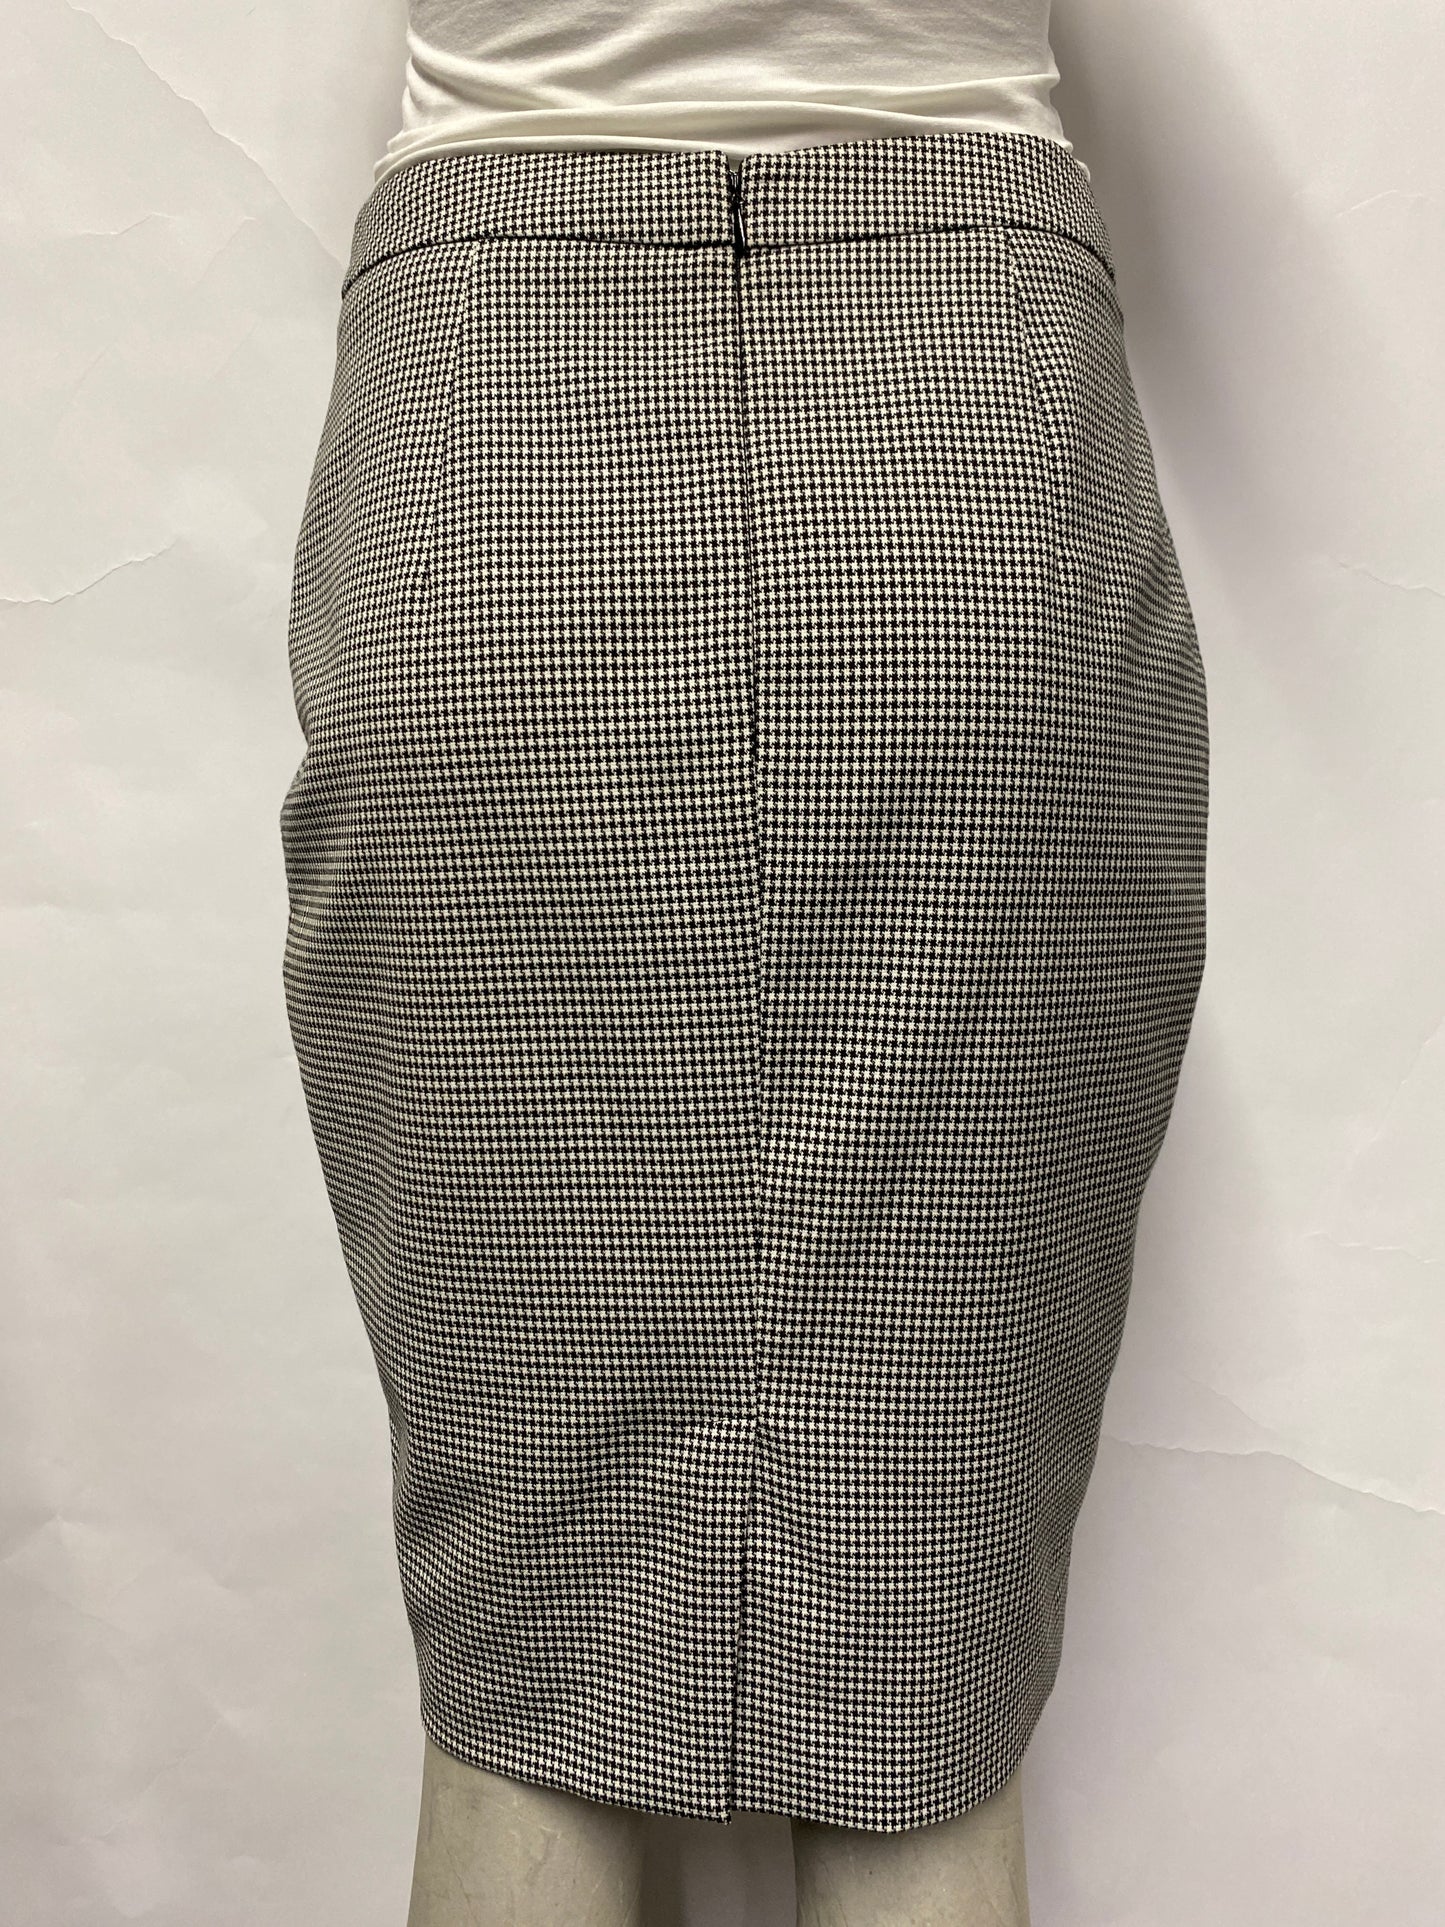 Reiss Black and White Houndstooth Pencil Skirt 8